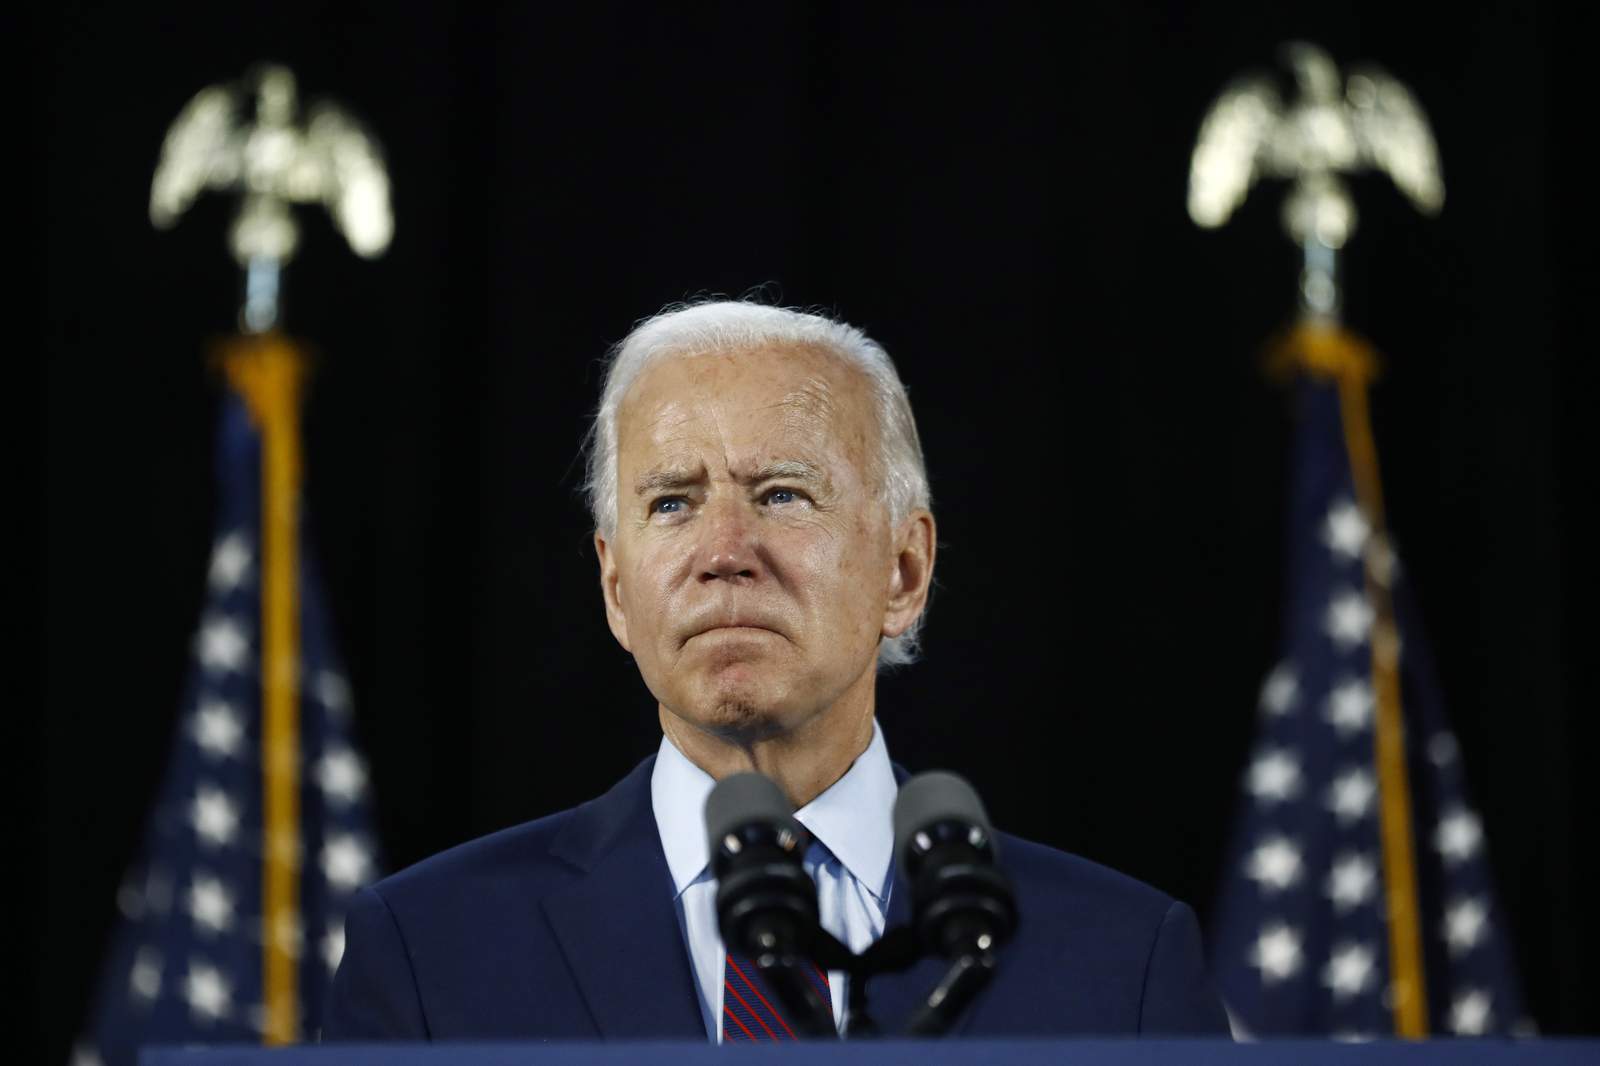 Biden to hammer Trump for handling of COVID-19 pandemic